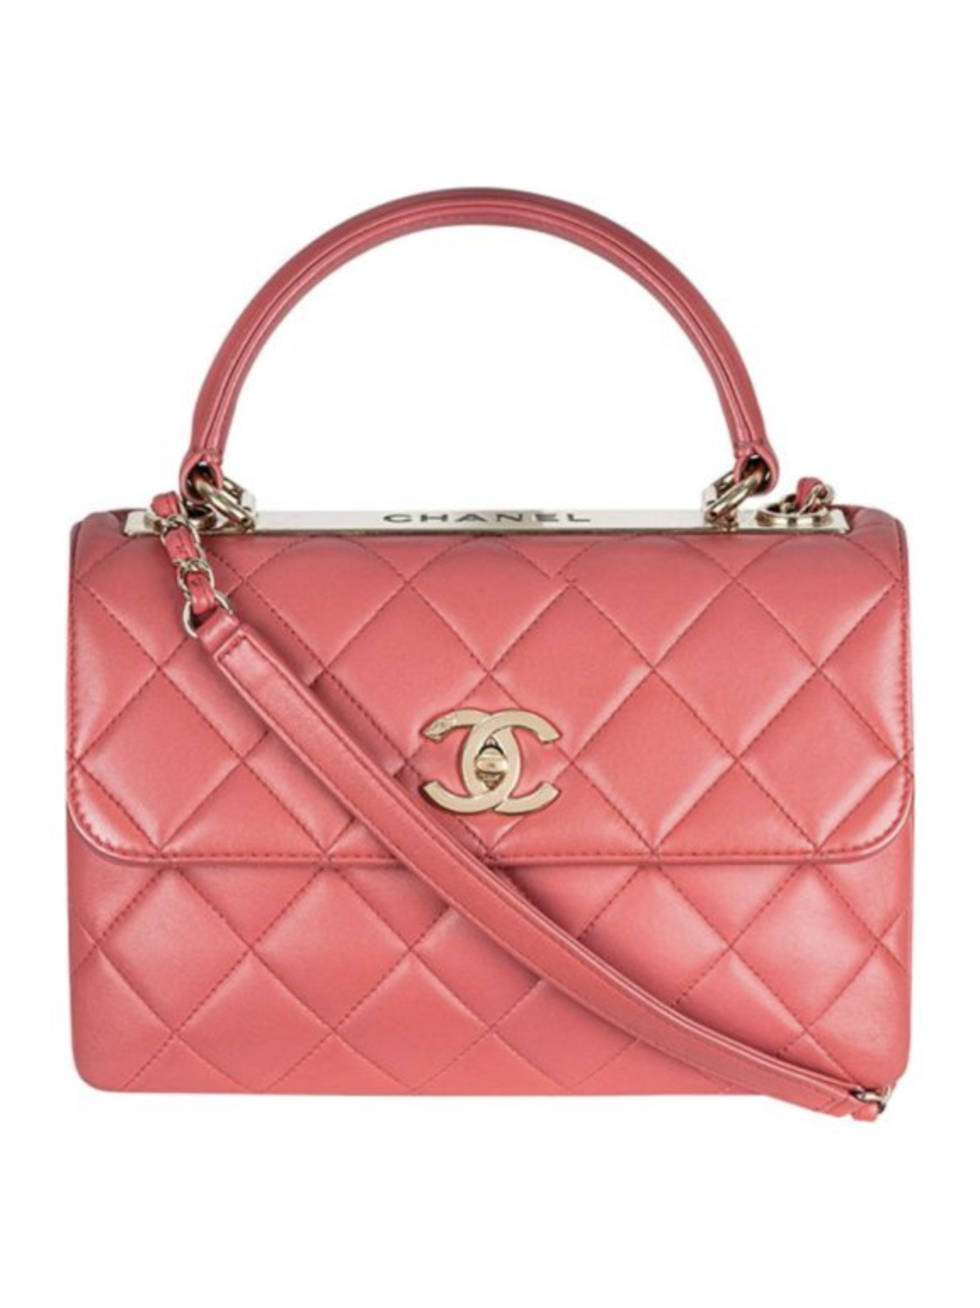 Coral-Pink Lambskin Leather Small Trendy CC Bag